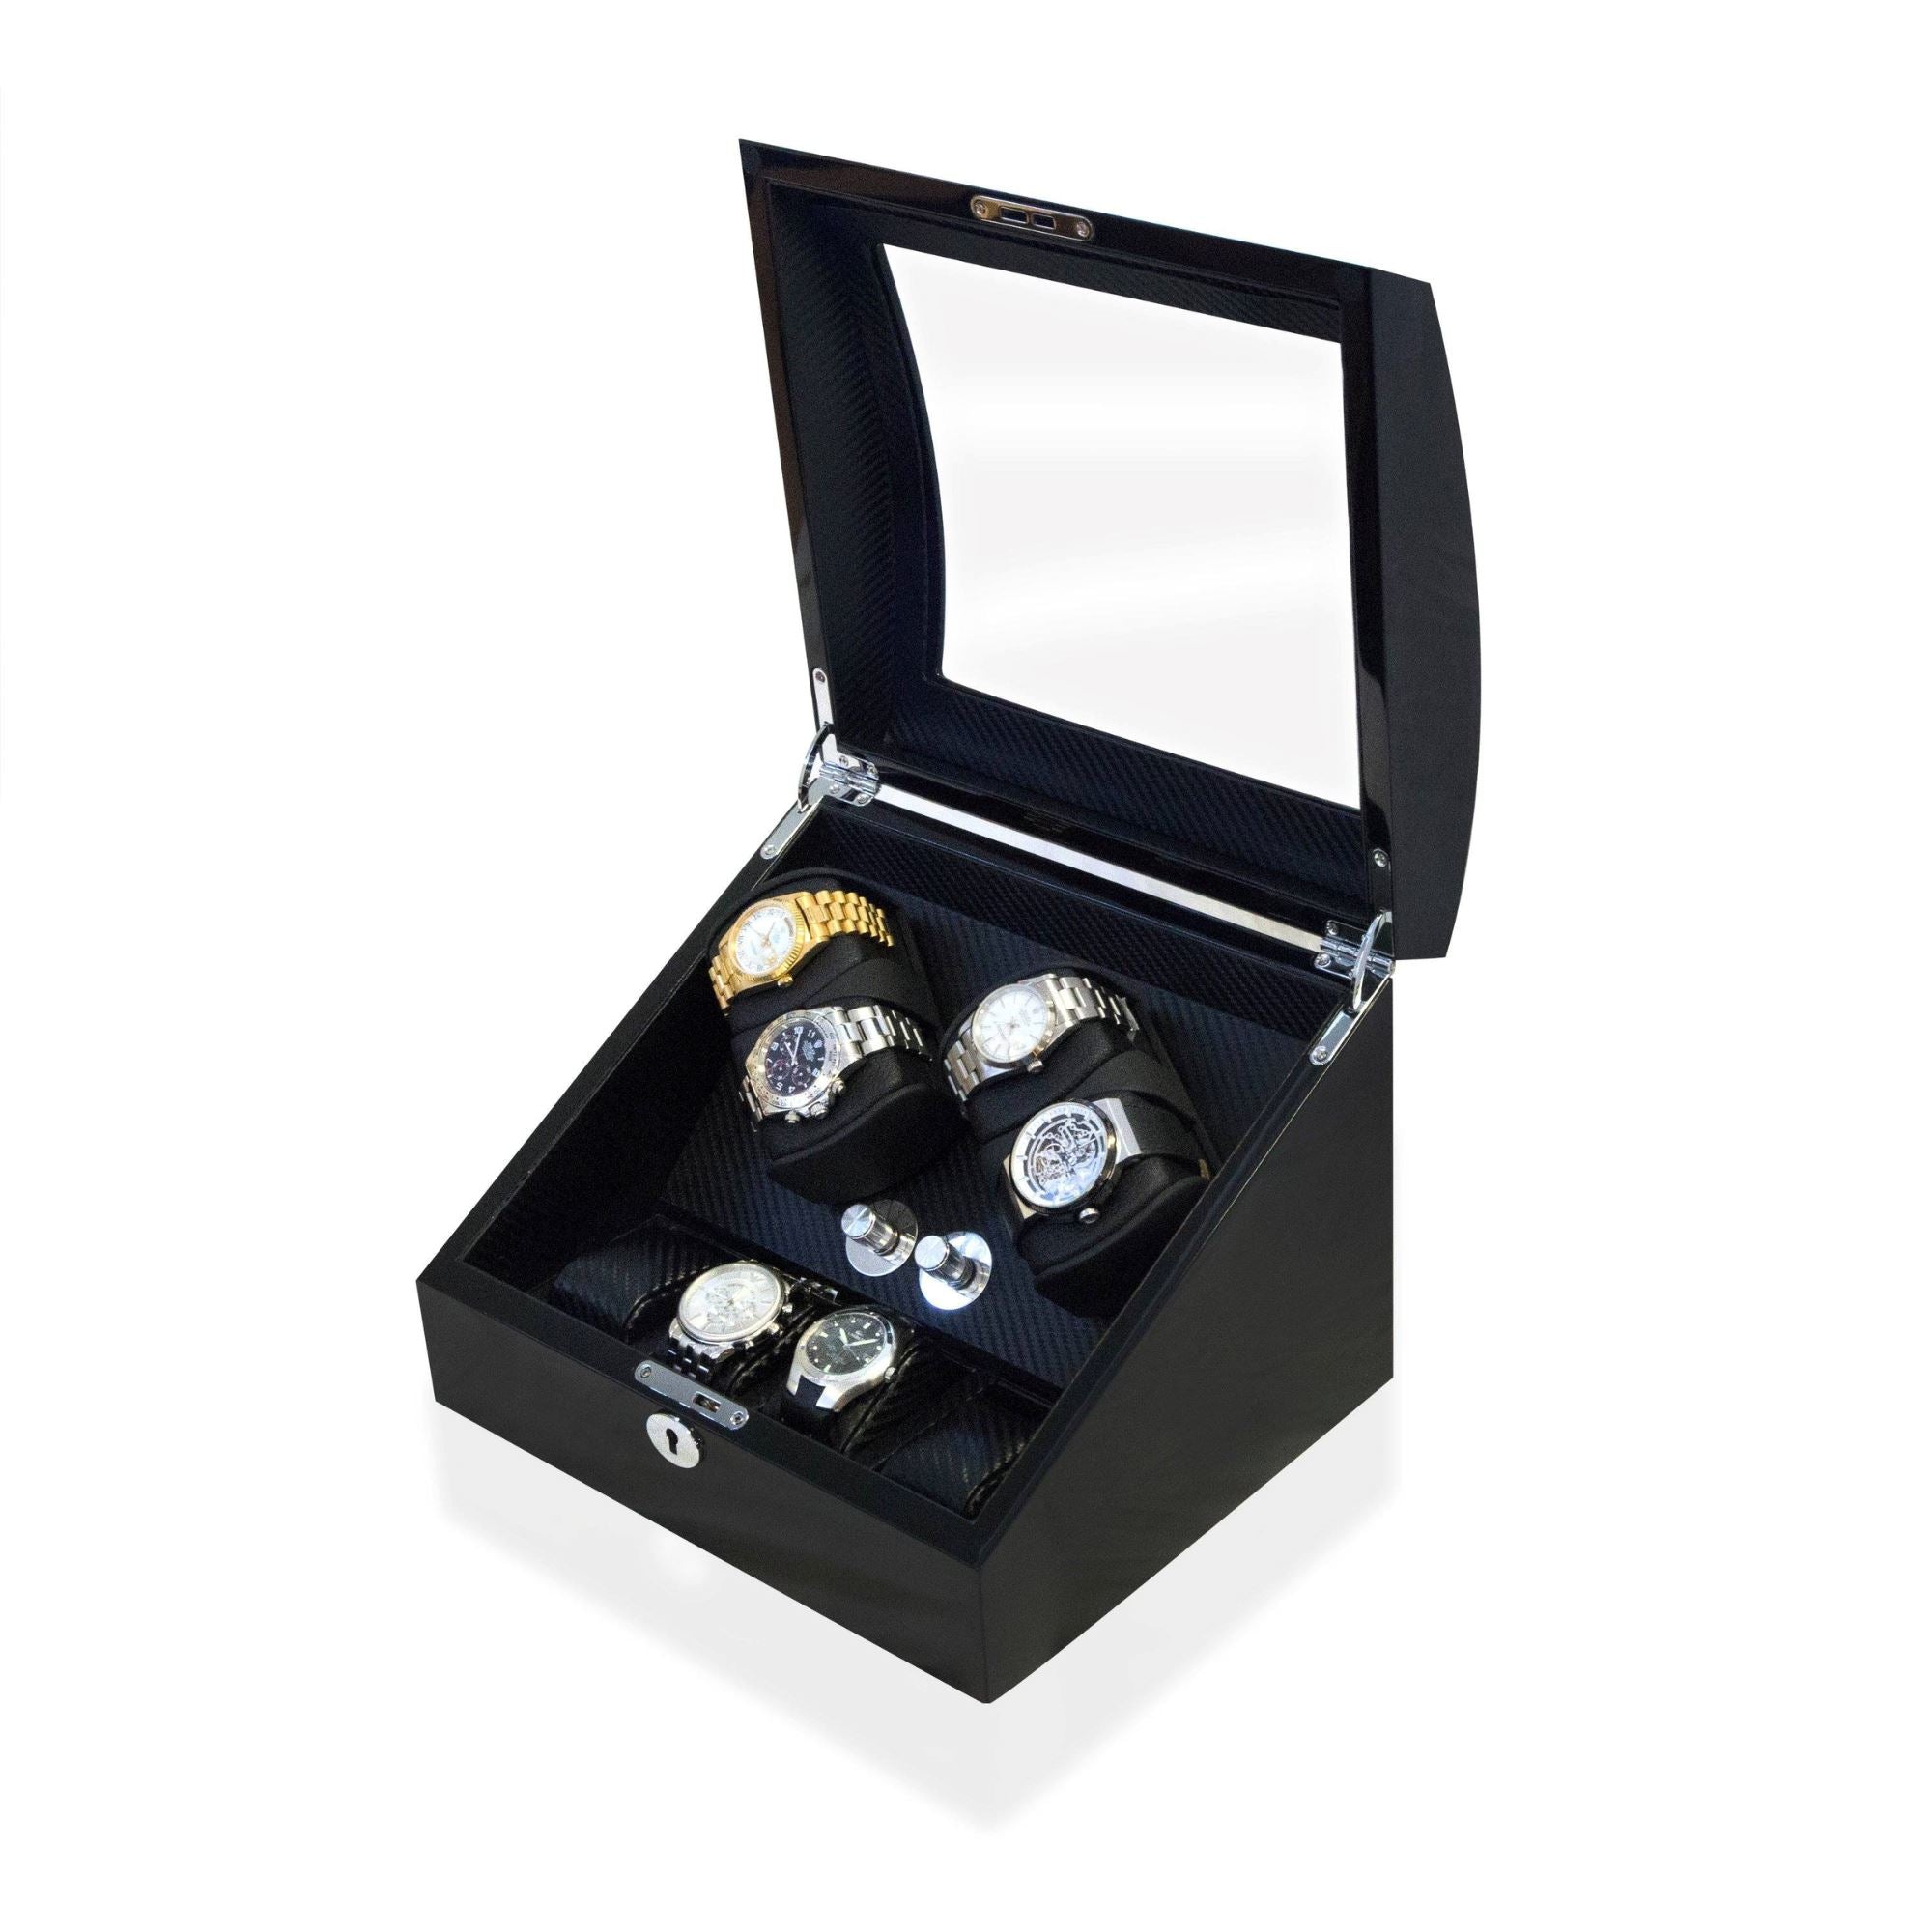 Avoca Watch Winder Box 4 + 4 Watches in Black - Carbon Fibre Interior Watch Winder Boxes Clinks 